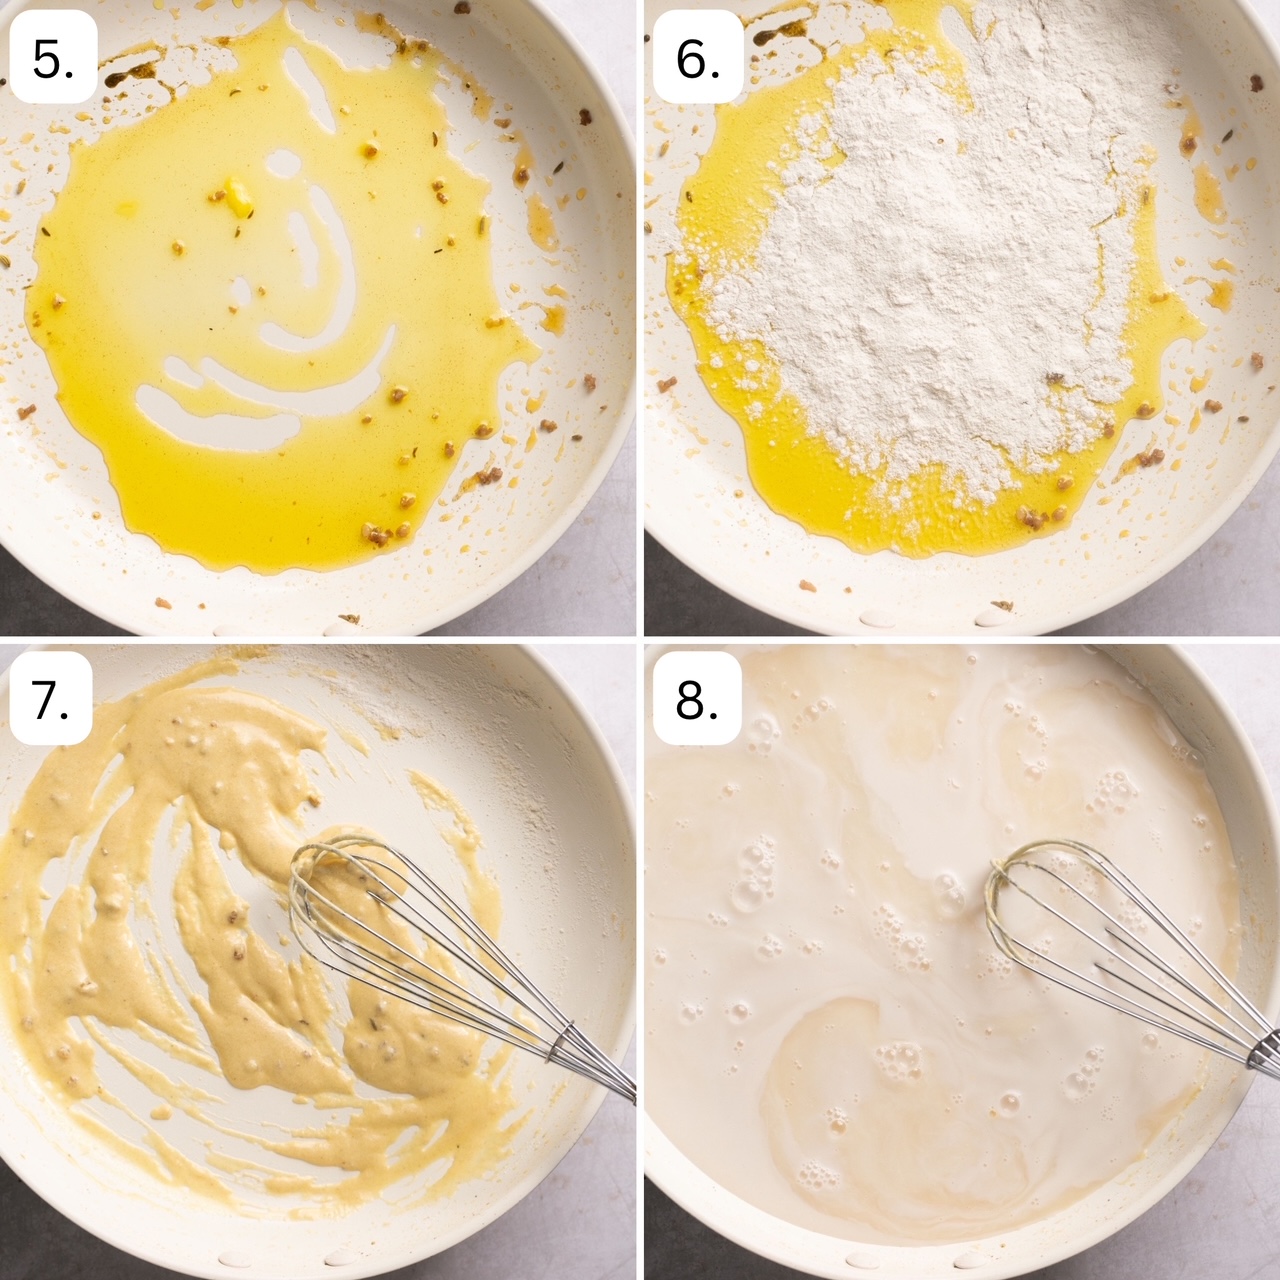 numbered step by step photos showing how to make the gravy